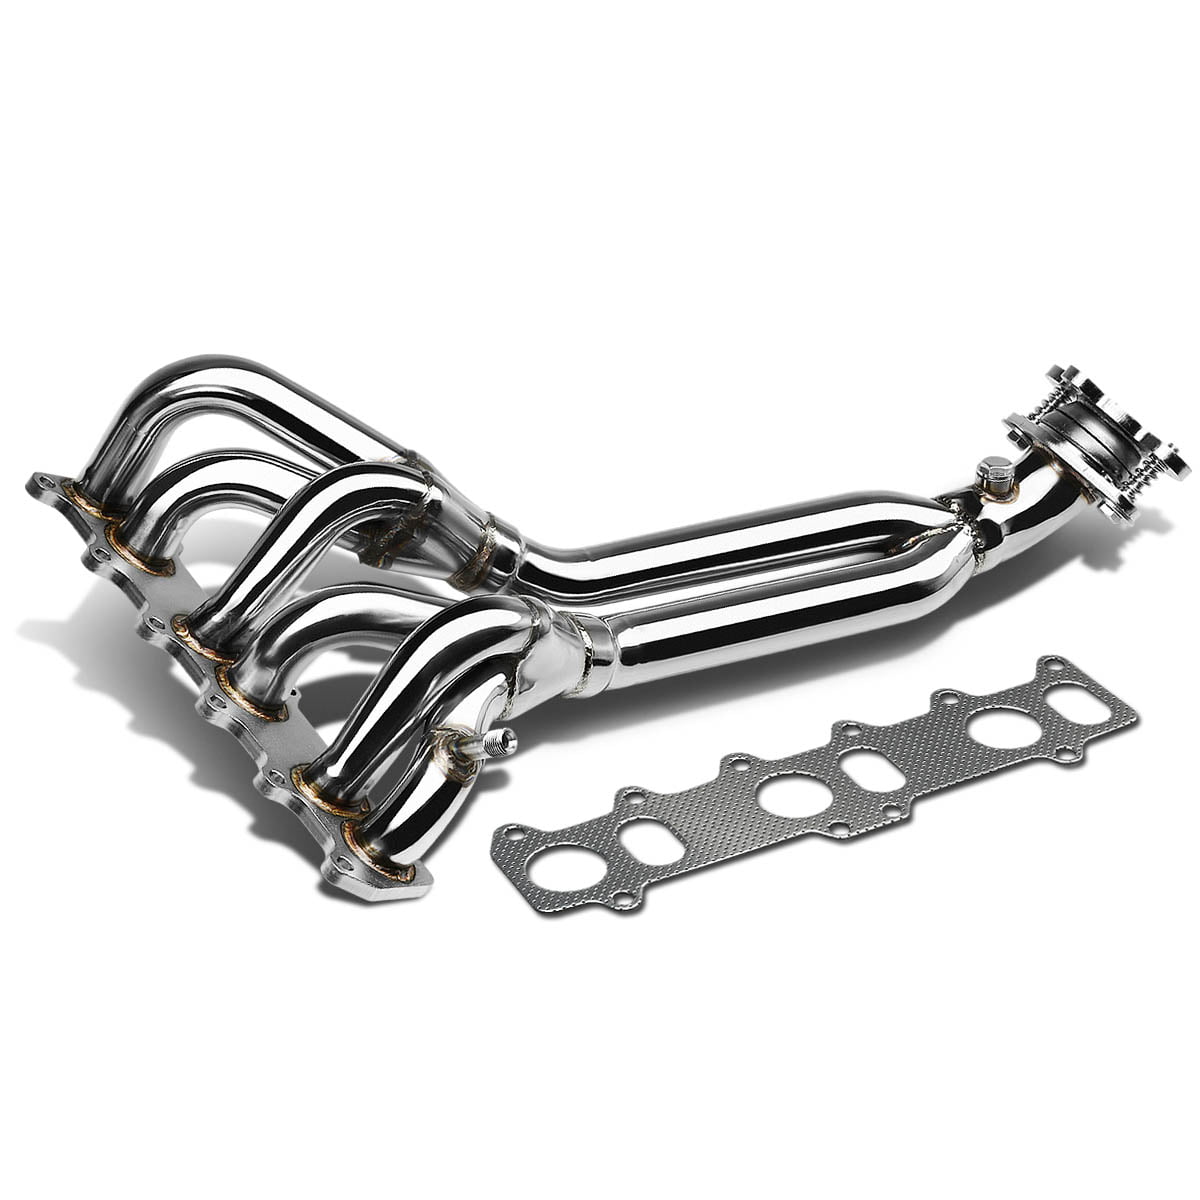 Stainless Racing Header / Exhaust Manifold For 1999 to 2005 Vw Jetta